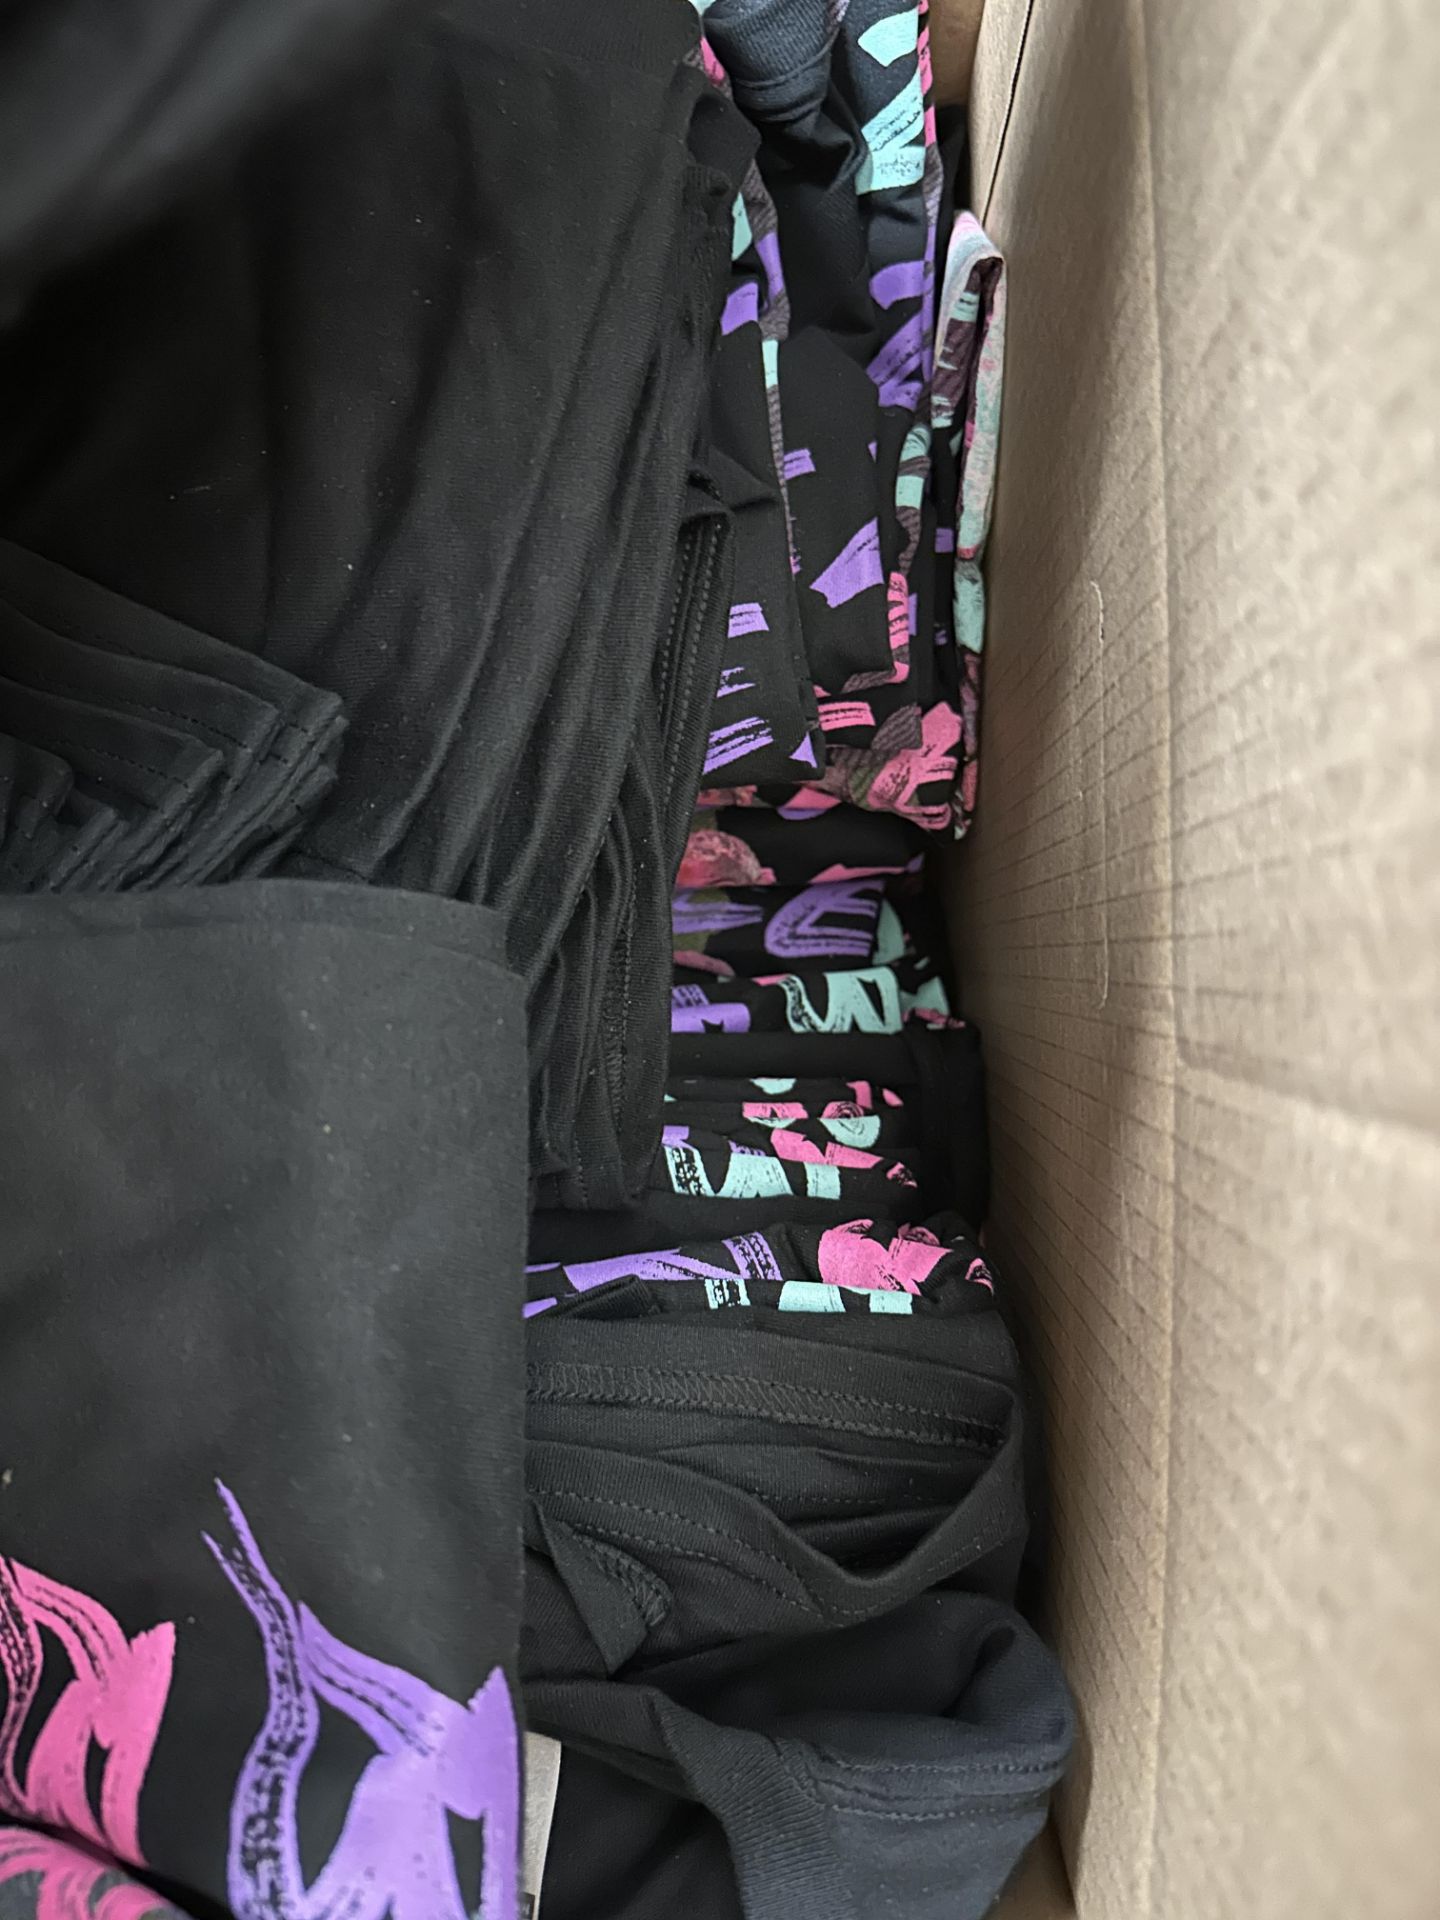 Very large Box of Chris Brown Breezy Tour T-Shirts, Assorted Sizes - Image 6 of 7